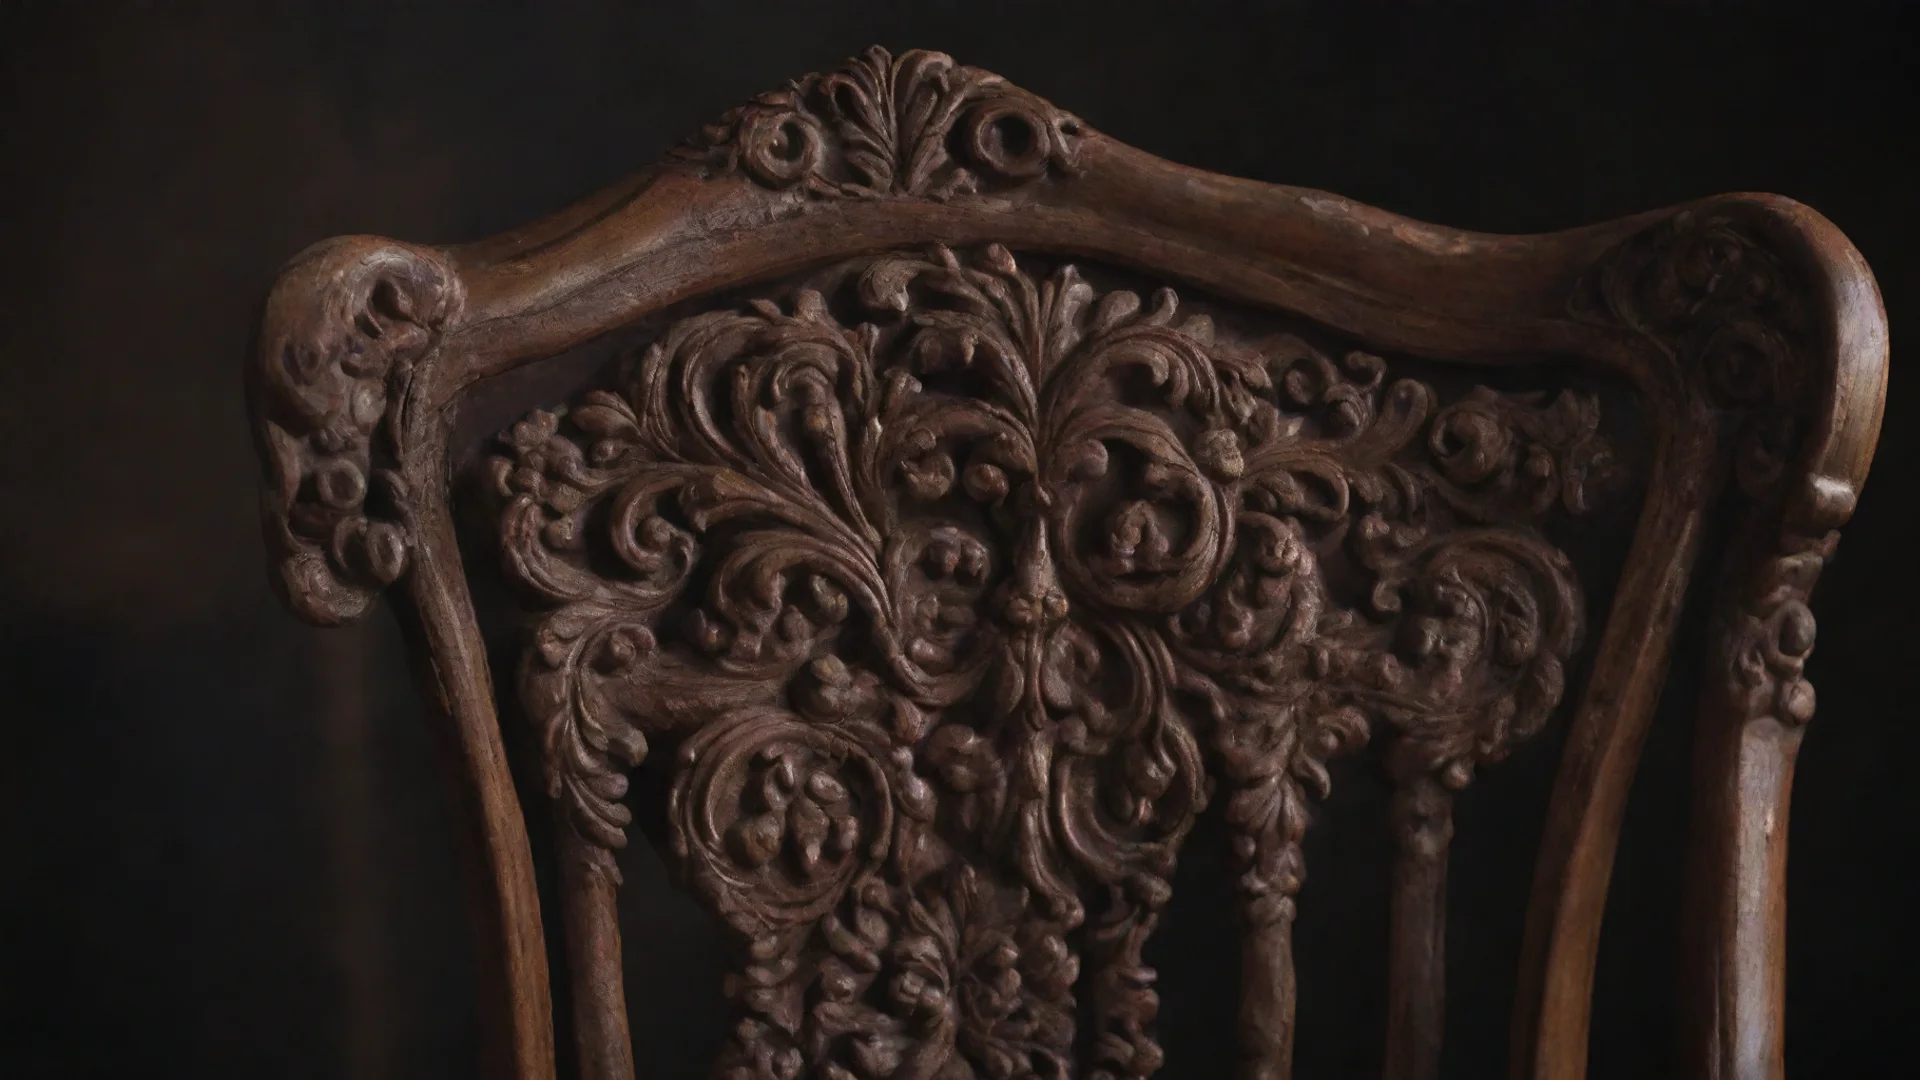 aitrending detail view of an ornate chair back dark brown at the edge blurred with high craftsmanship and dark background good looking fantastic 1 hdwidescreen